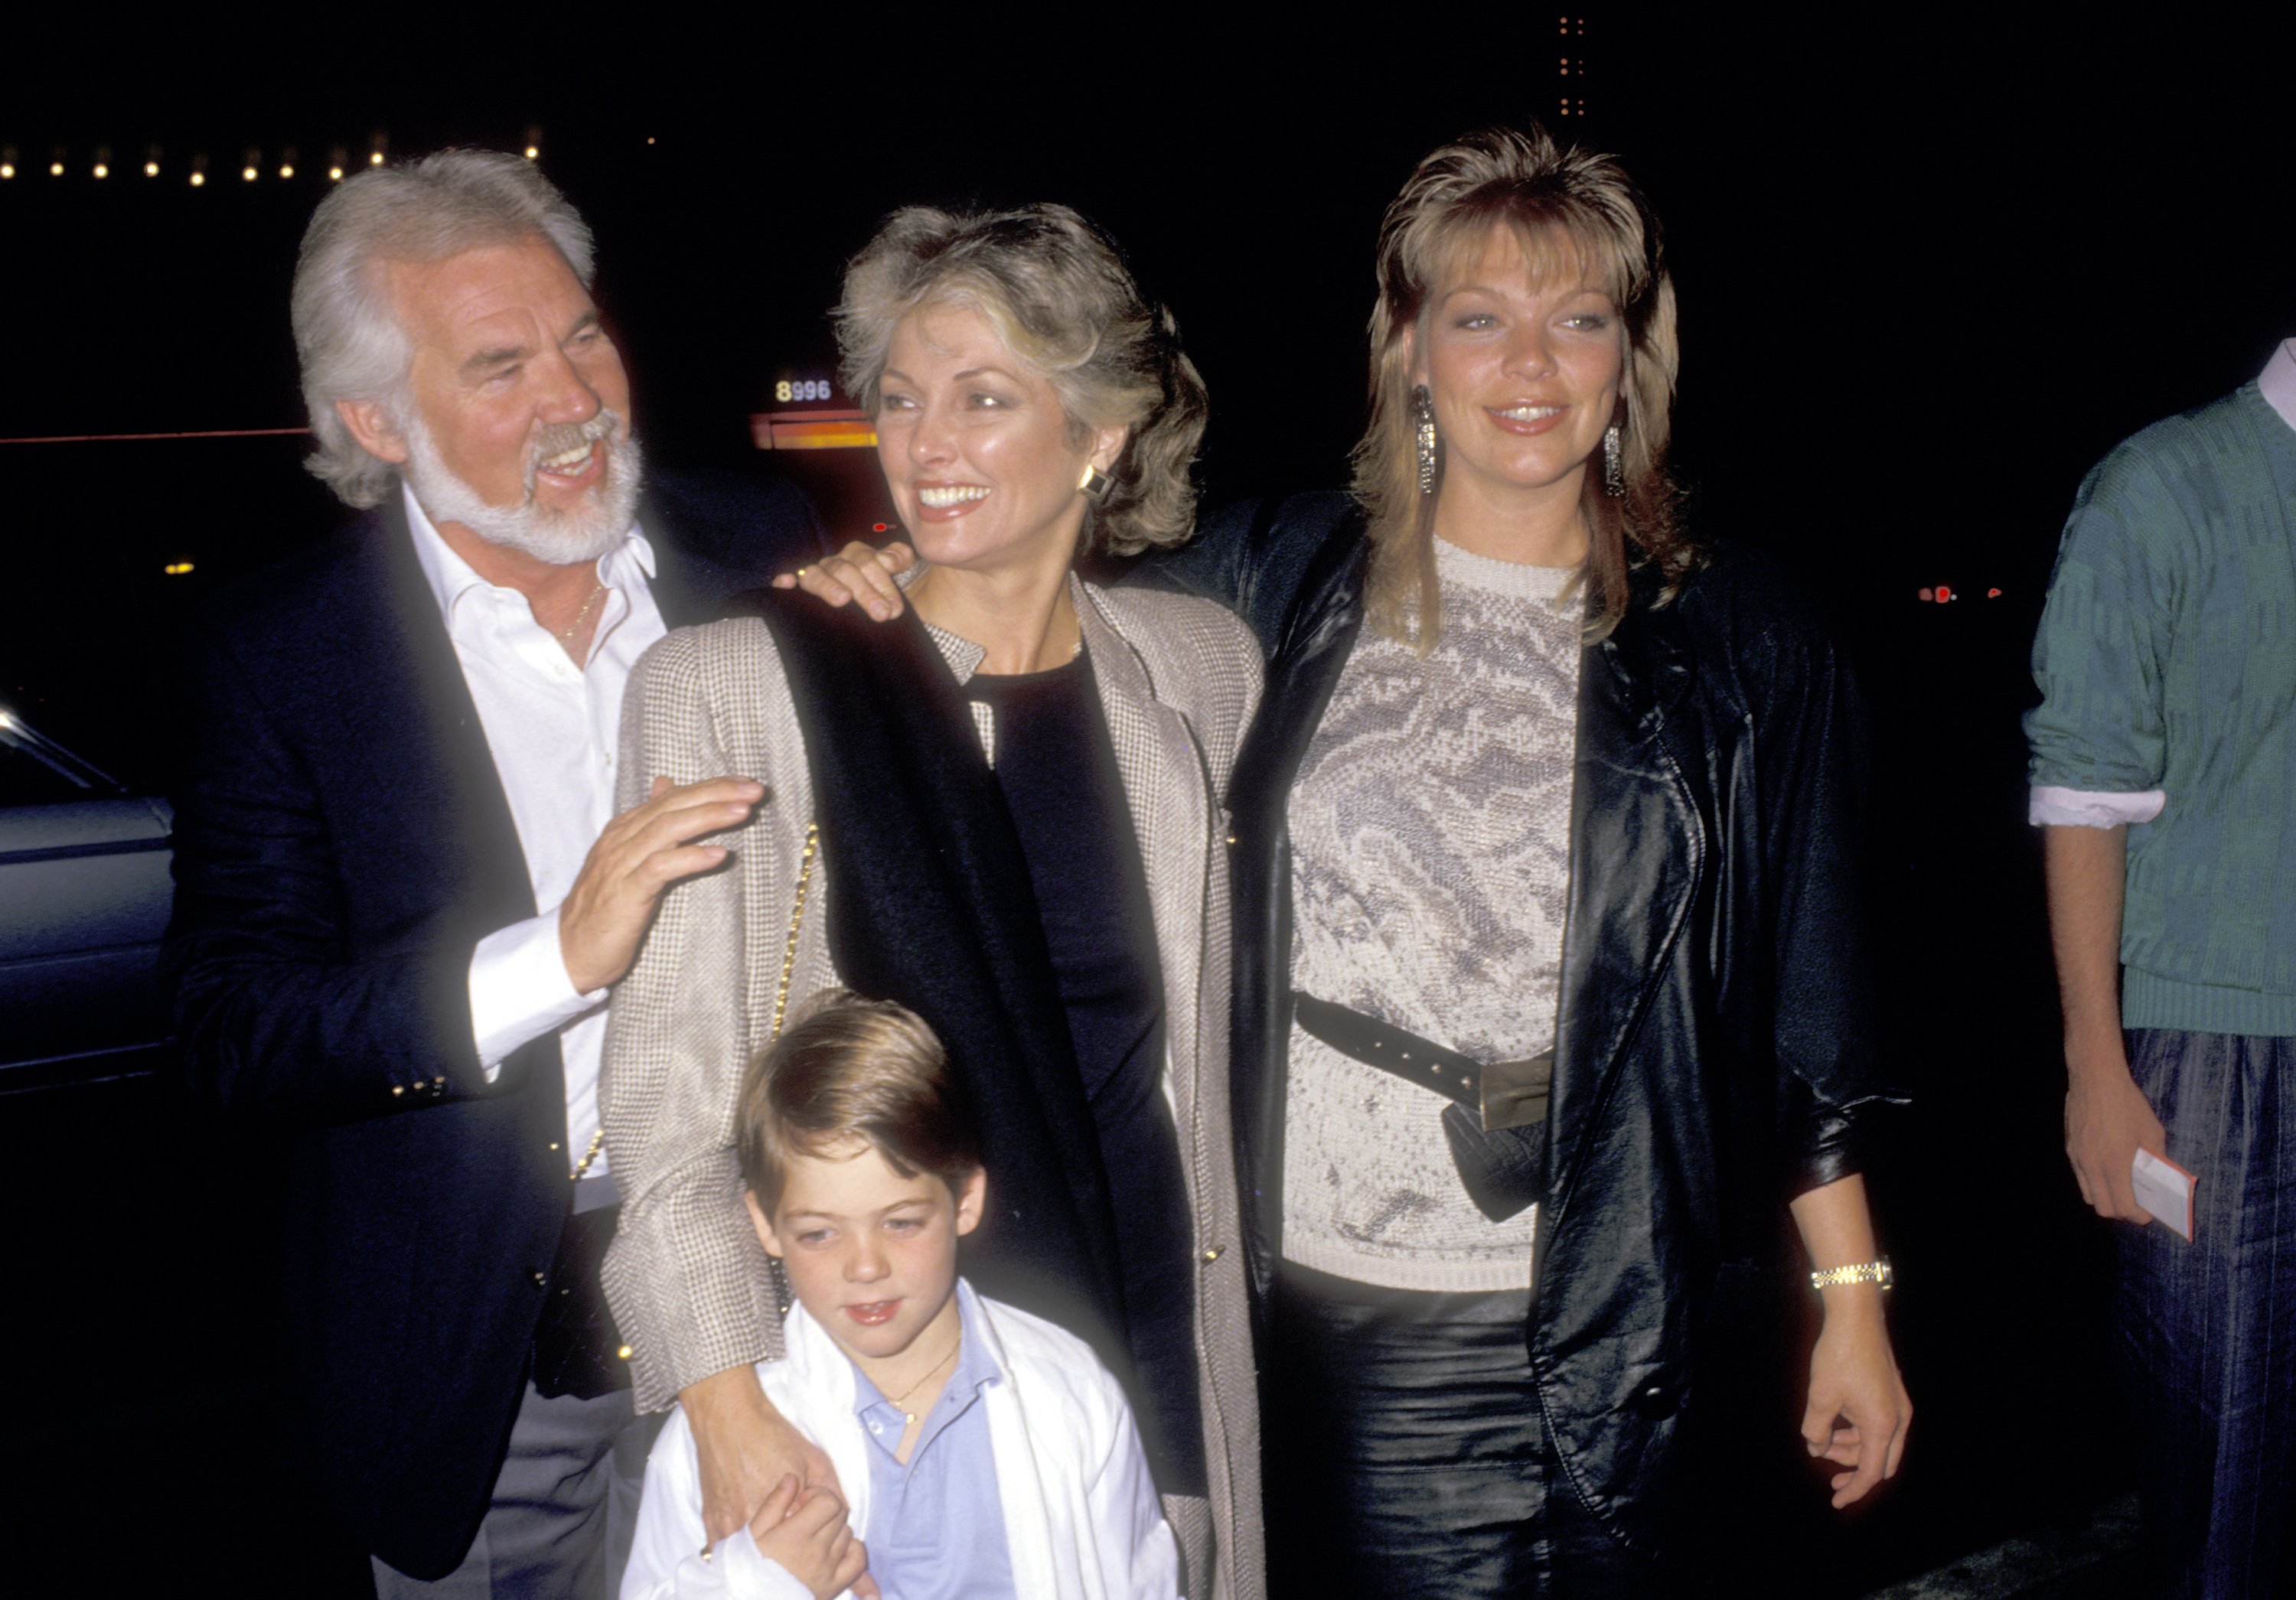 Kenny Rogers is pictured with his ex-wife Marianne Gordon, son Christopher Rogers and daughter Carole Rogers at the David Copperfield Magic Show on May 15, 1987 at the Pantages Theater in Hollywood, California |  Source: Getty Images